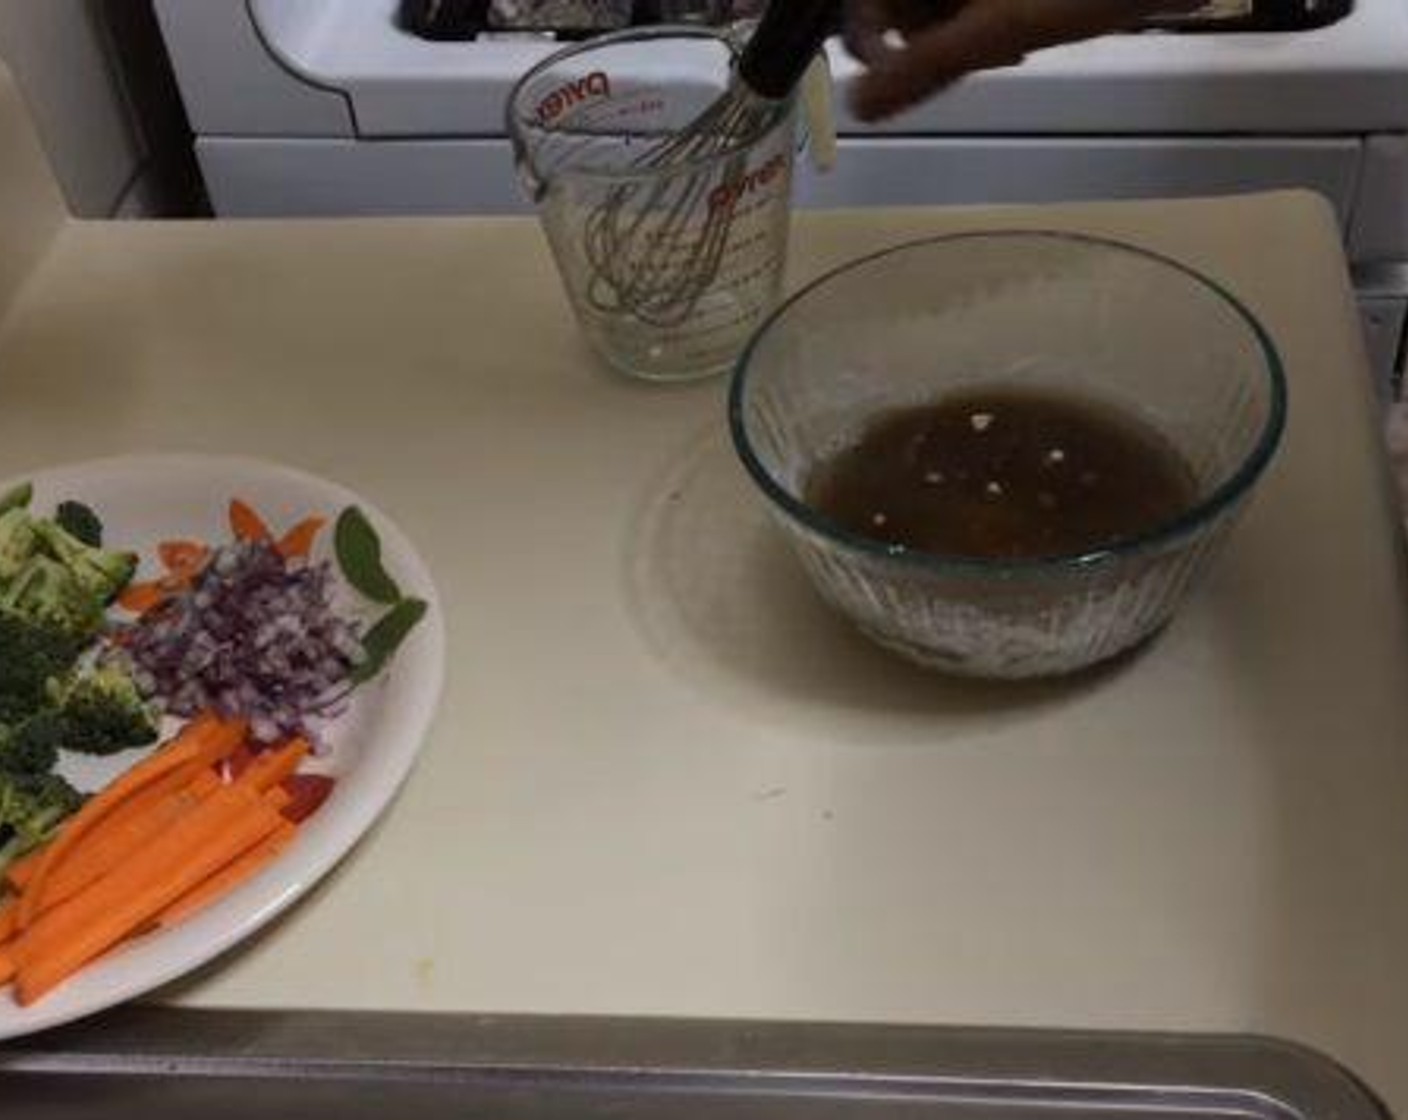 step 2 Then in a separate bowl, mix together the Low-Sodium Chicken Broth (1 cup) Honey (1/4 cup), Fresh Ginger (1/4 tsp), Garlic (2 cloves) and Soy Sauce (1/4 cup).